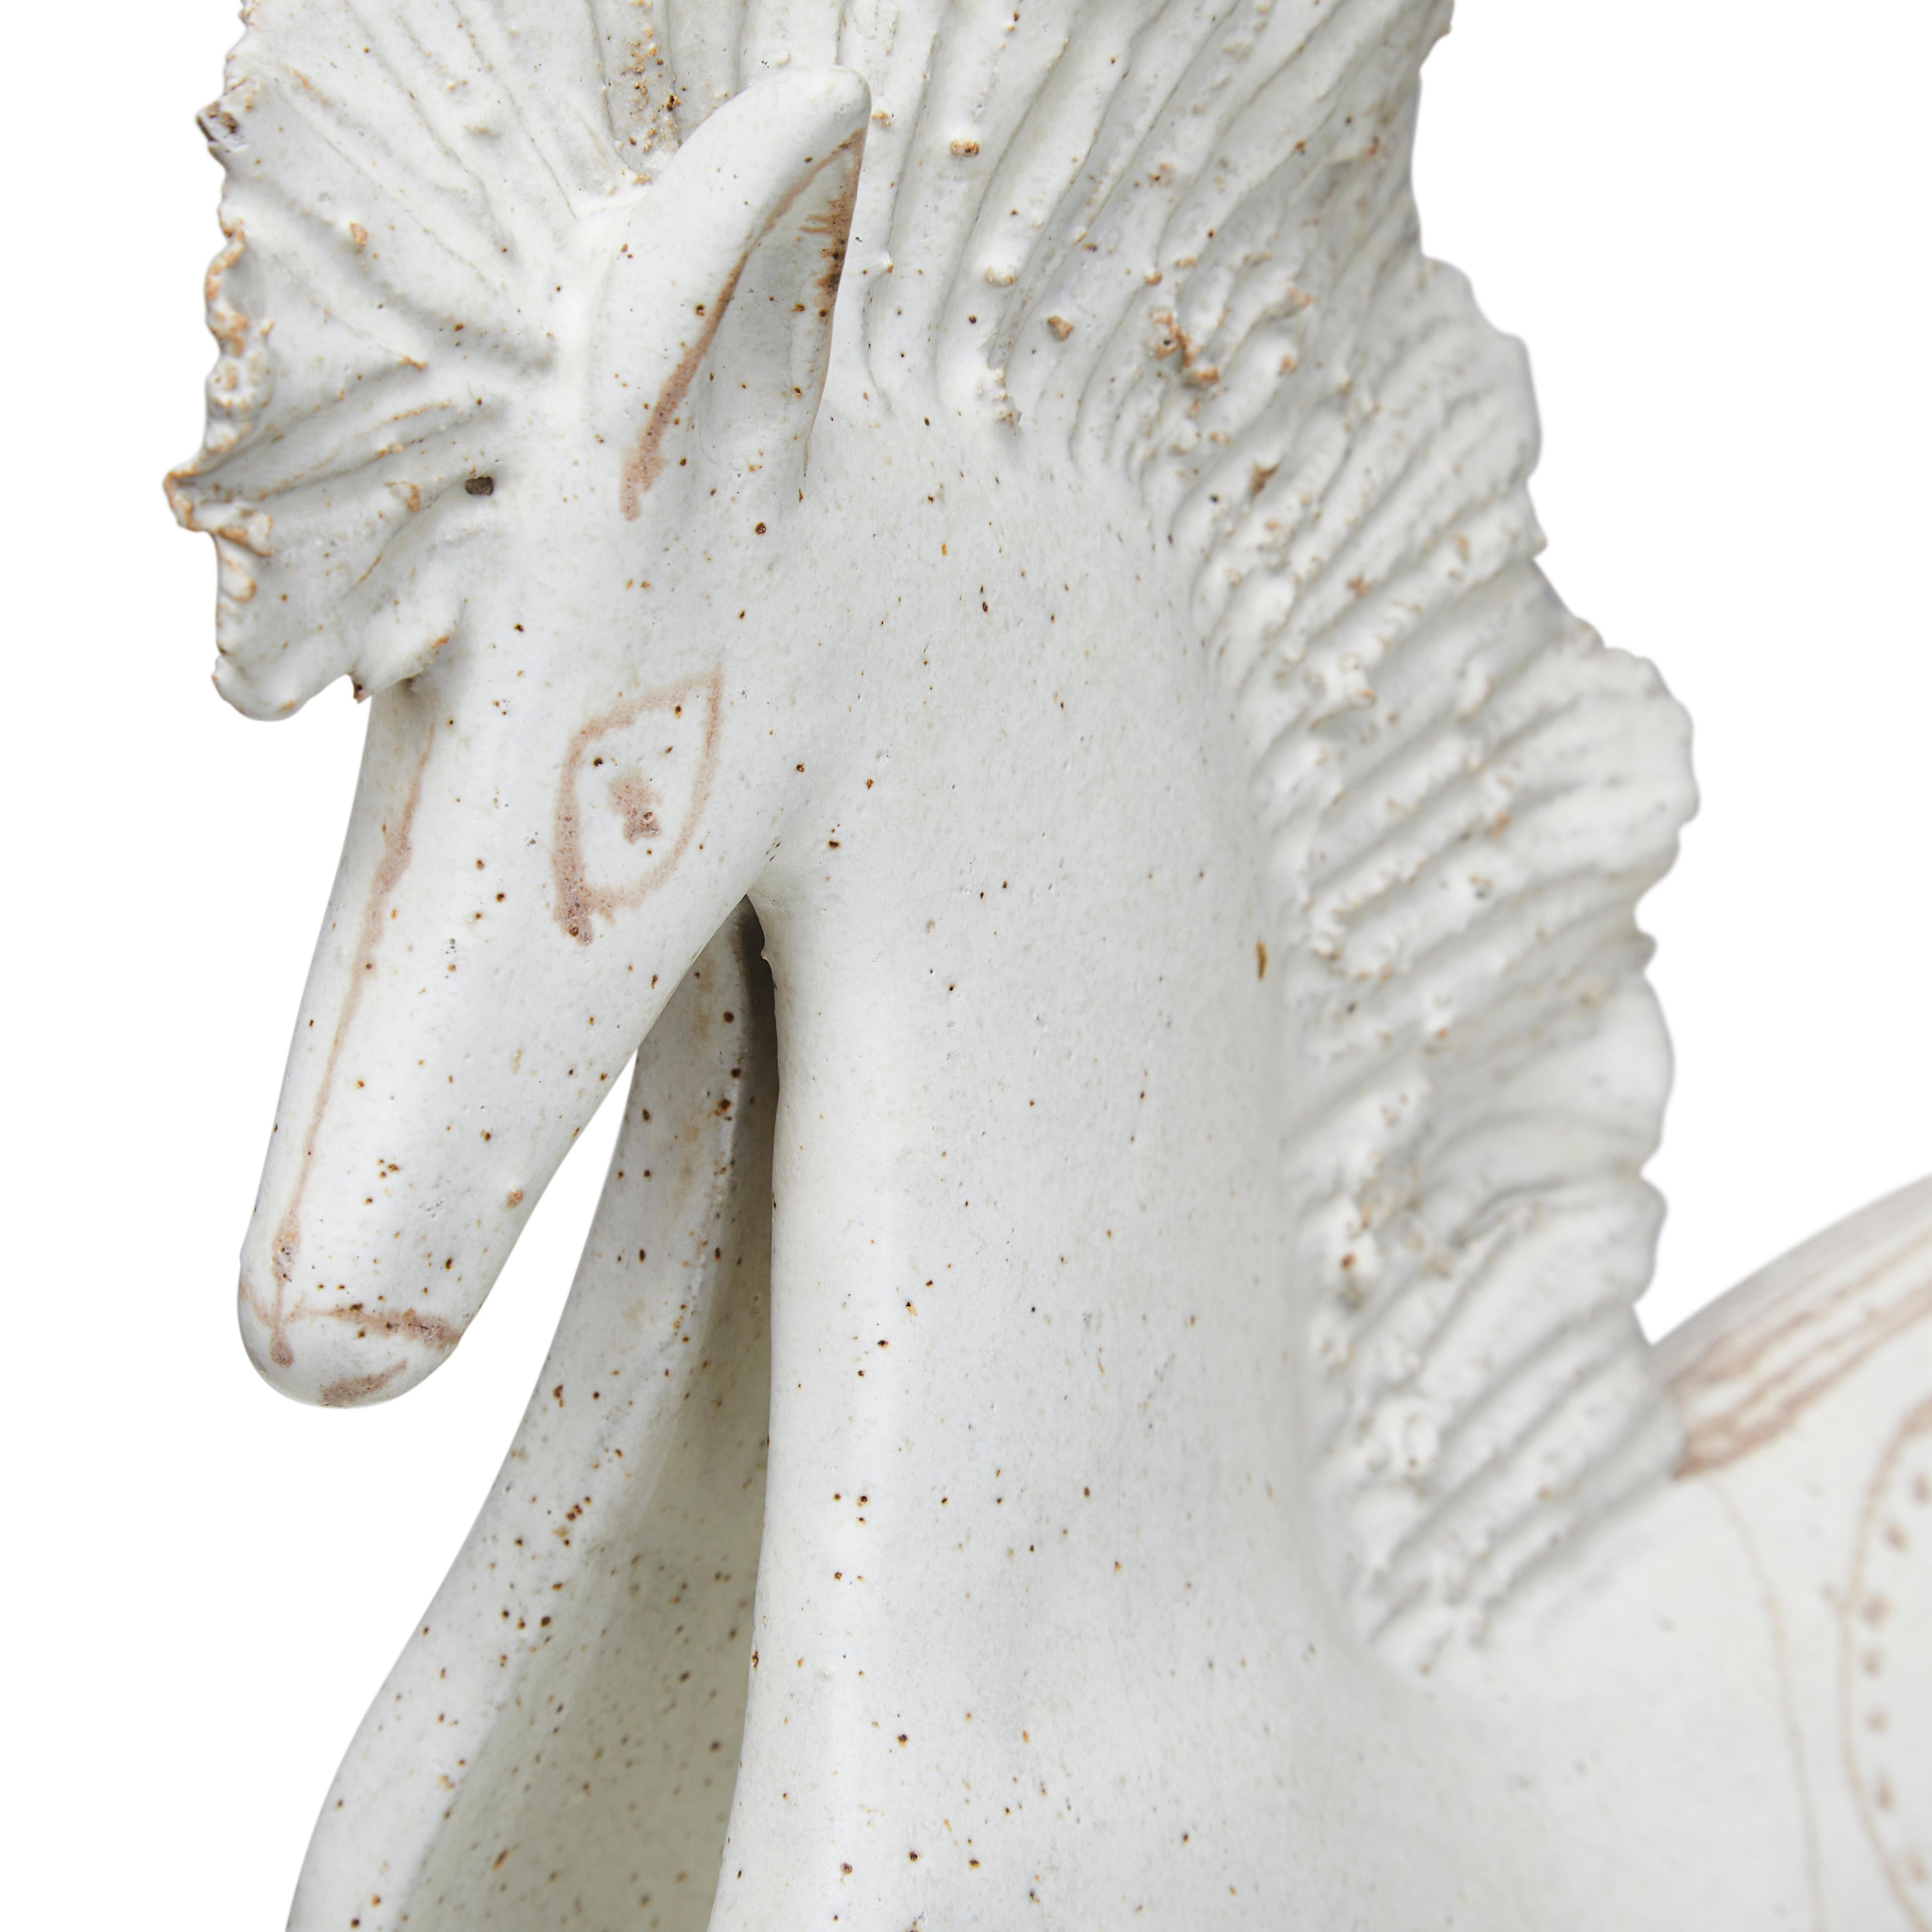 Large matt glazed ceramic horse by the celebrated ceramicist Bruno Gambone. This particular subject matter is an unusual one for this artist. Italy circa 1970s.
Bruno Gambone is an Italian ceramist and the son of Guido Gambone, one of the most